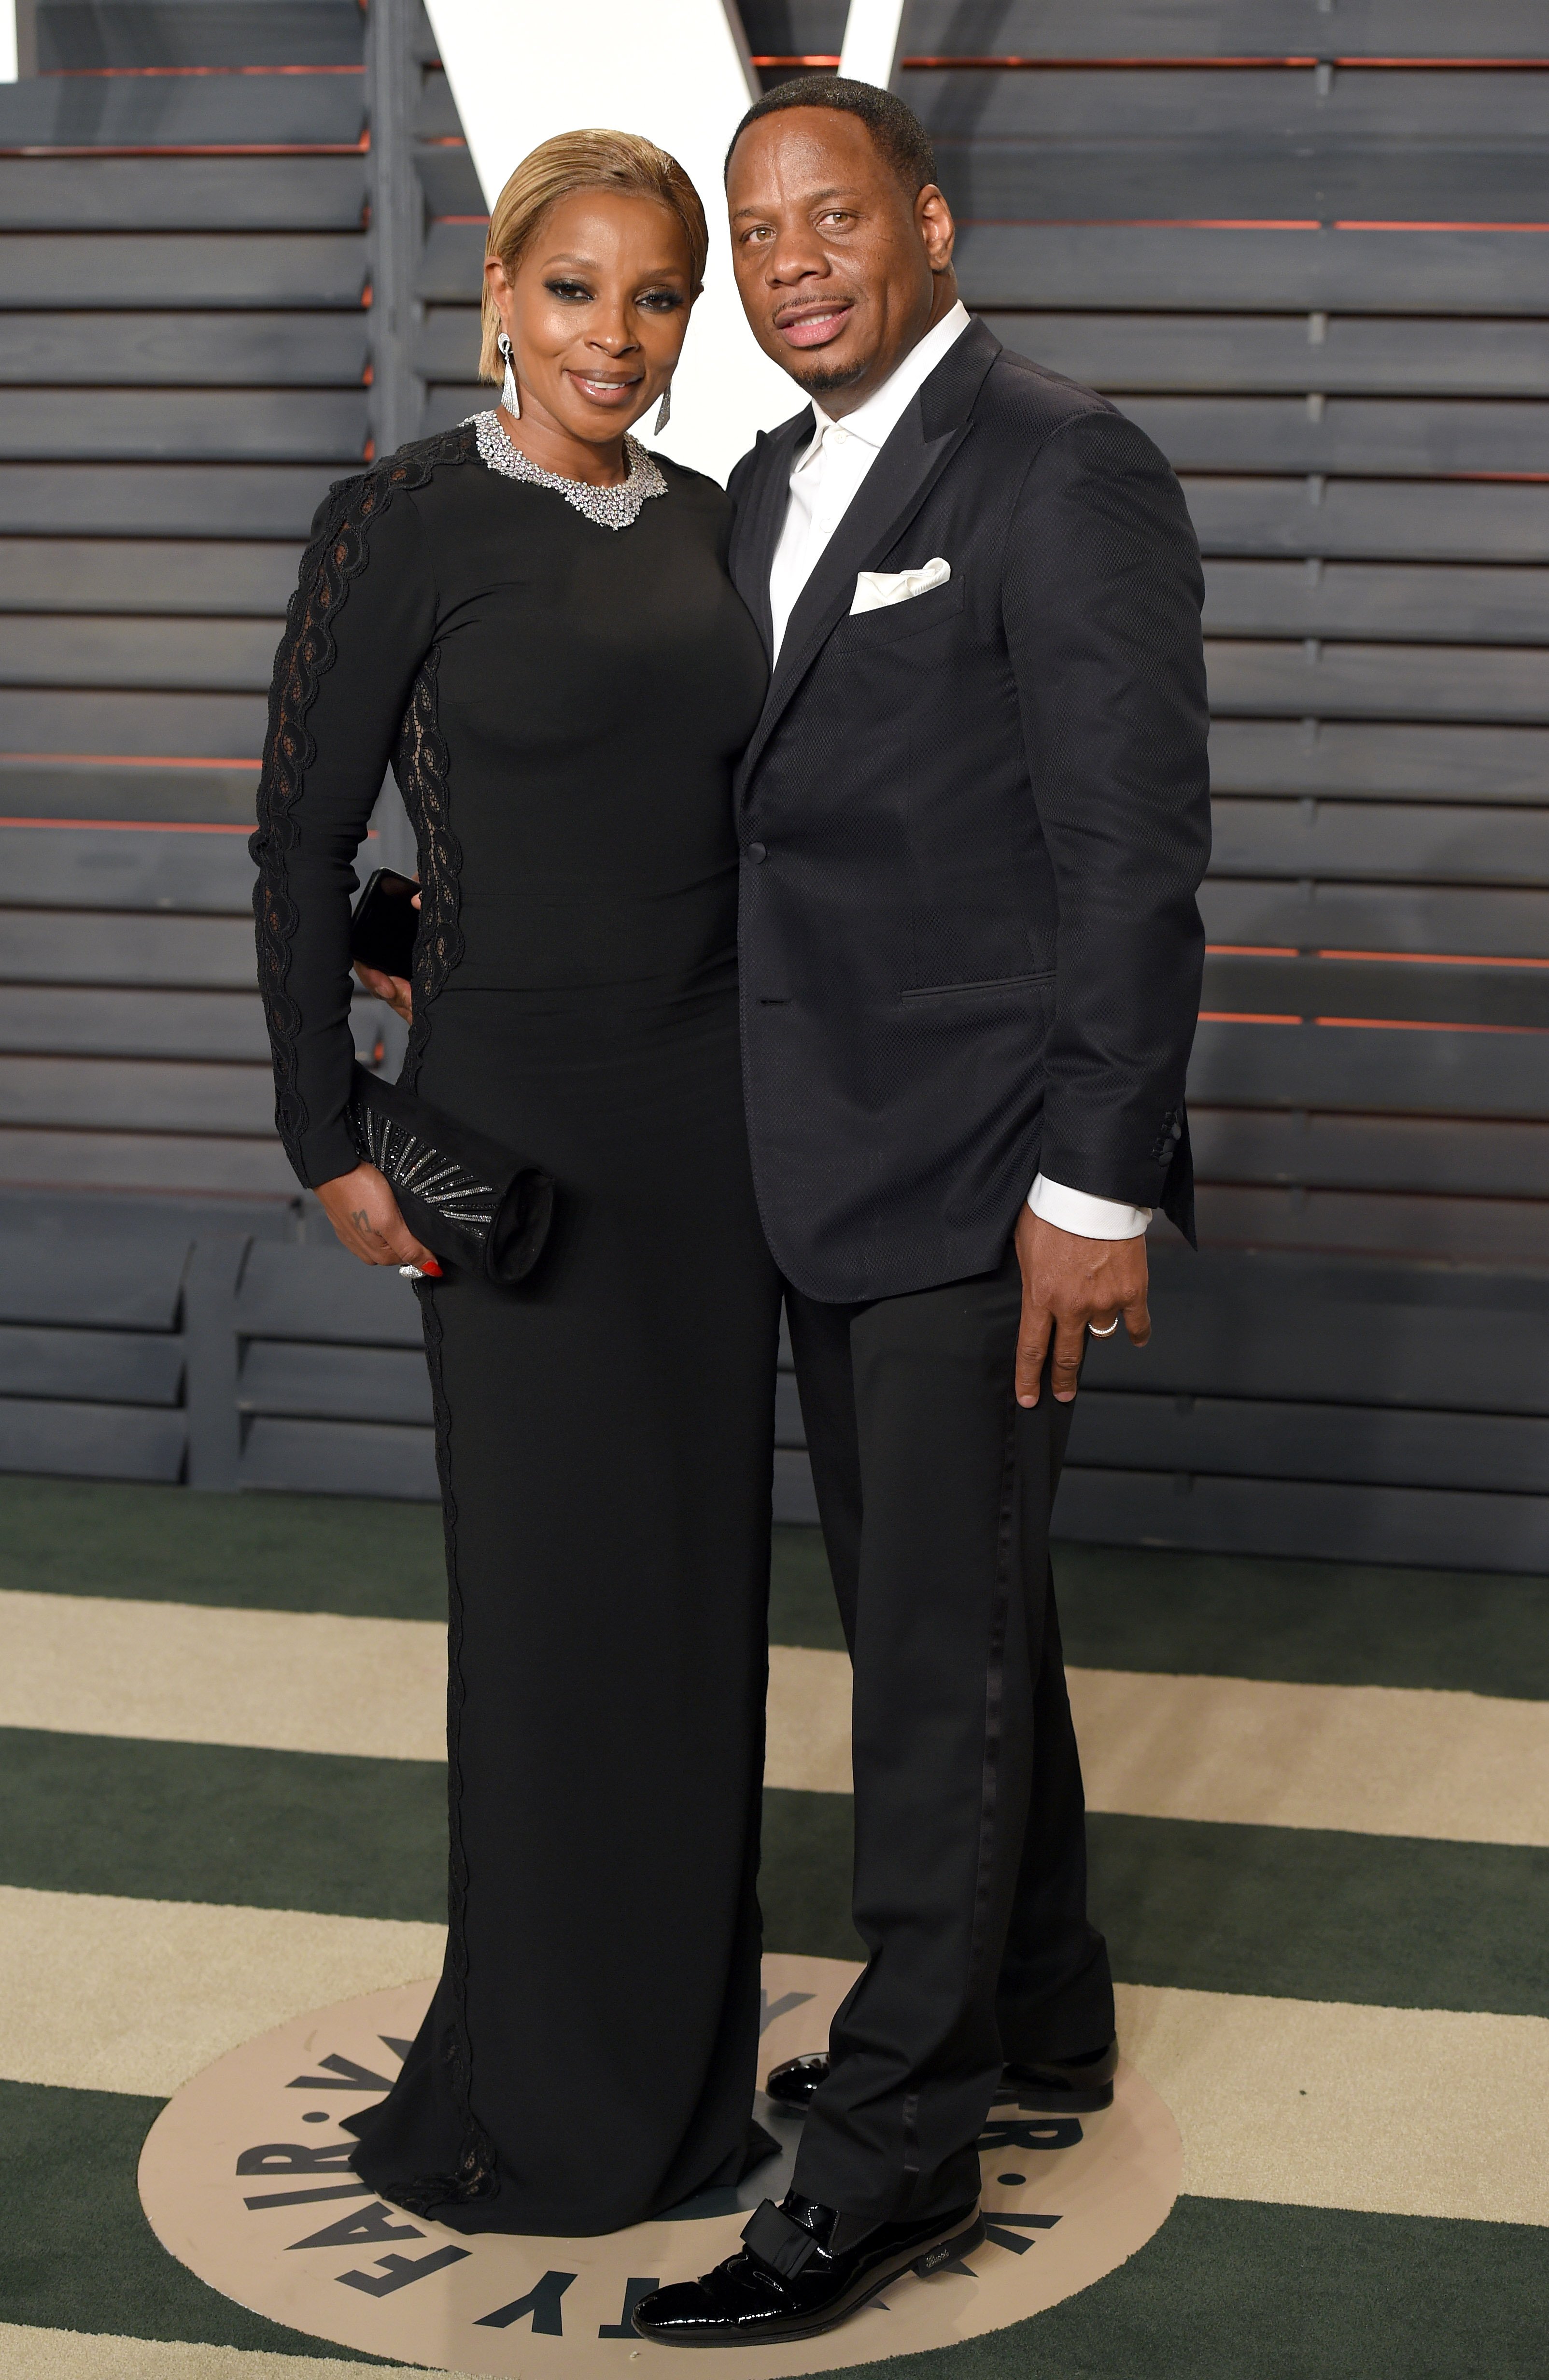 Mary J. Blige and Kendu Isaacs at the 2016 Vanity Fair Oscar Party | Source: Getty Images